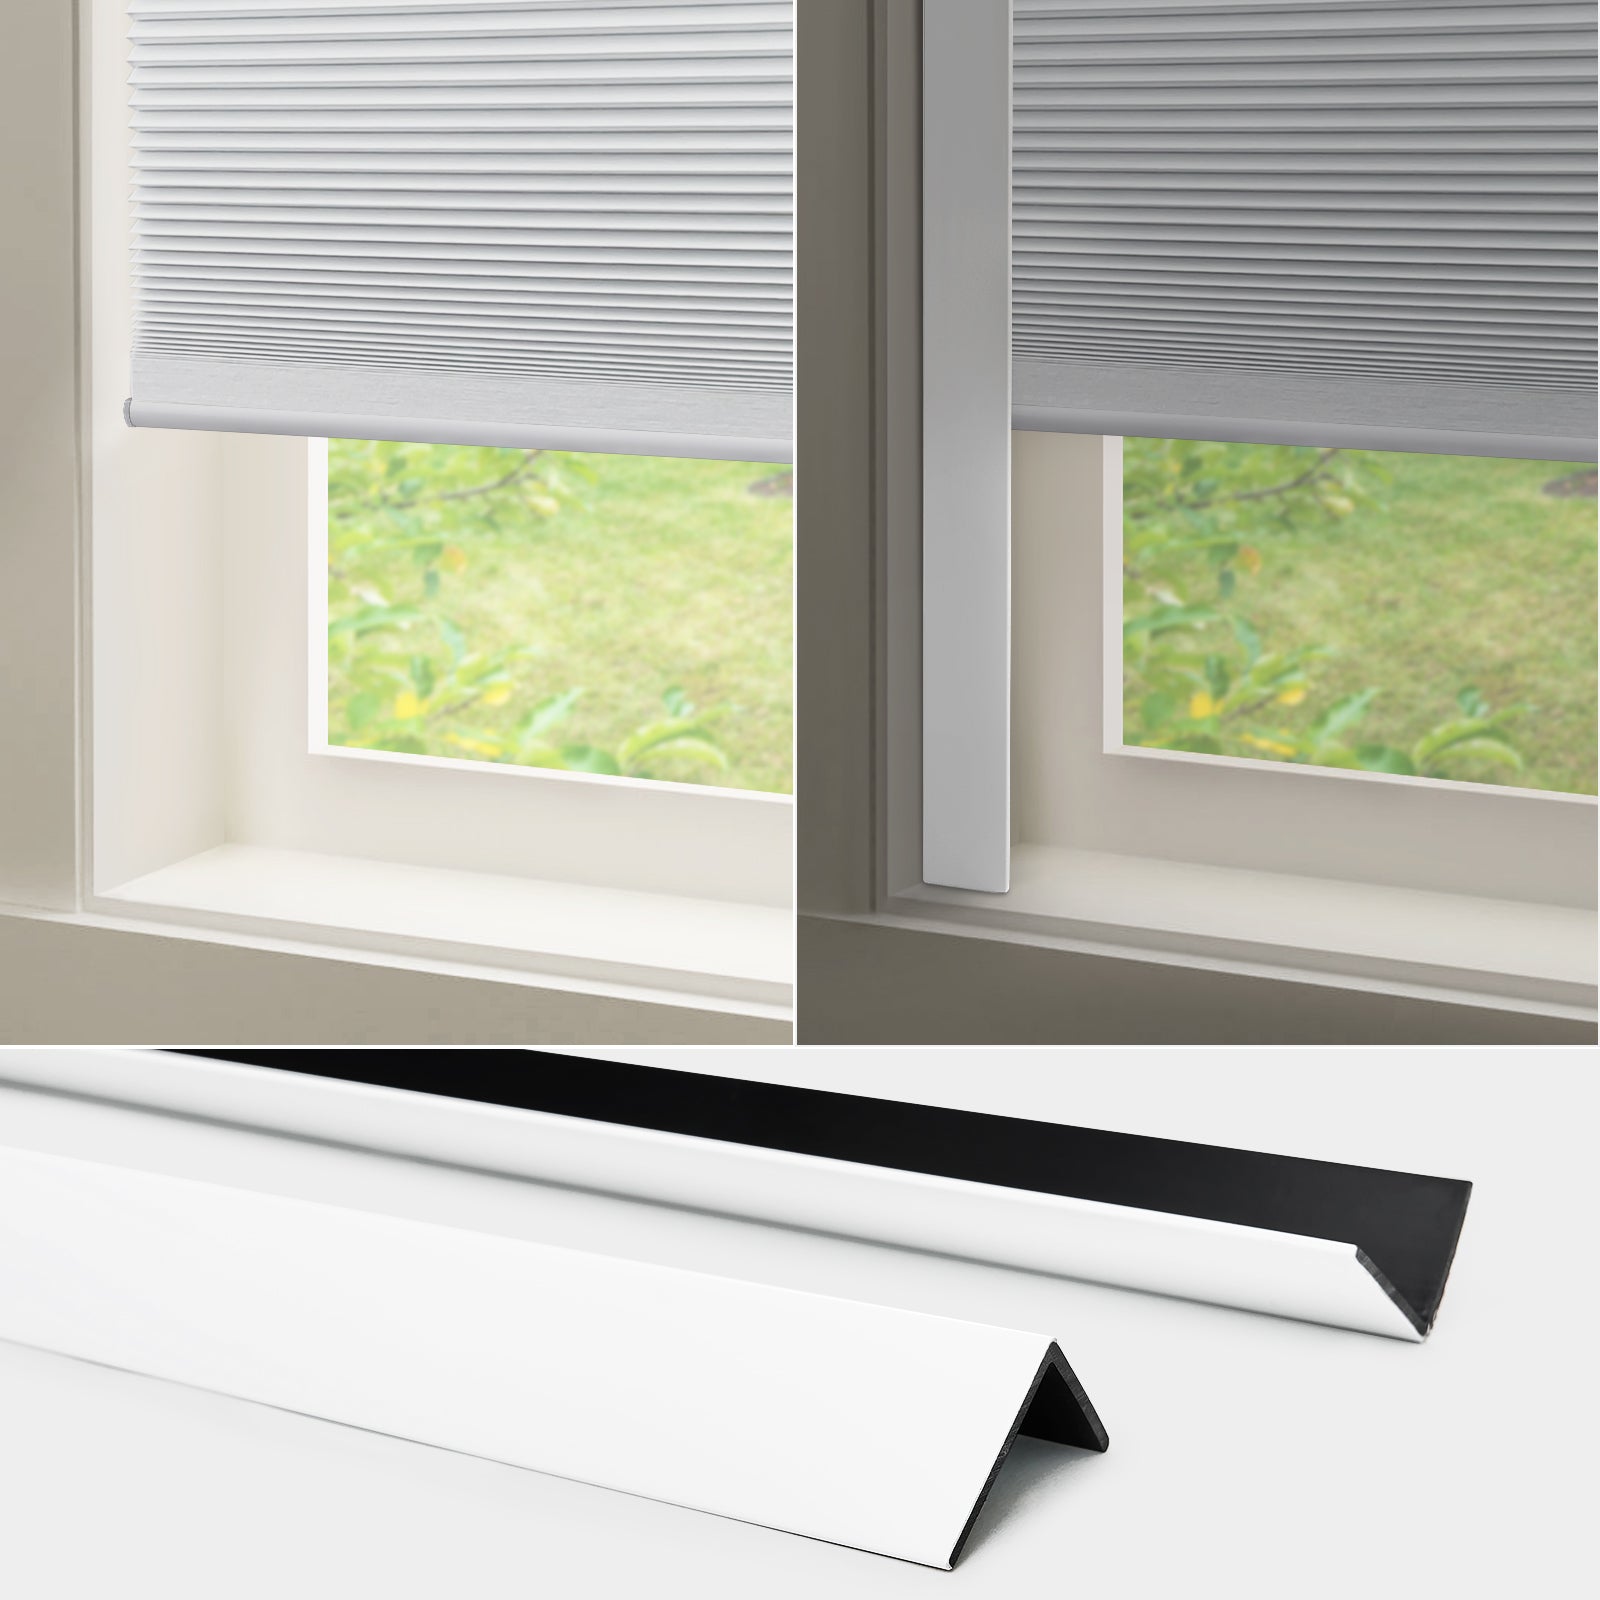 Keego PVC Light Blocking Strips for Window Shades & Blinds